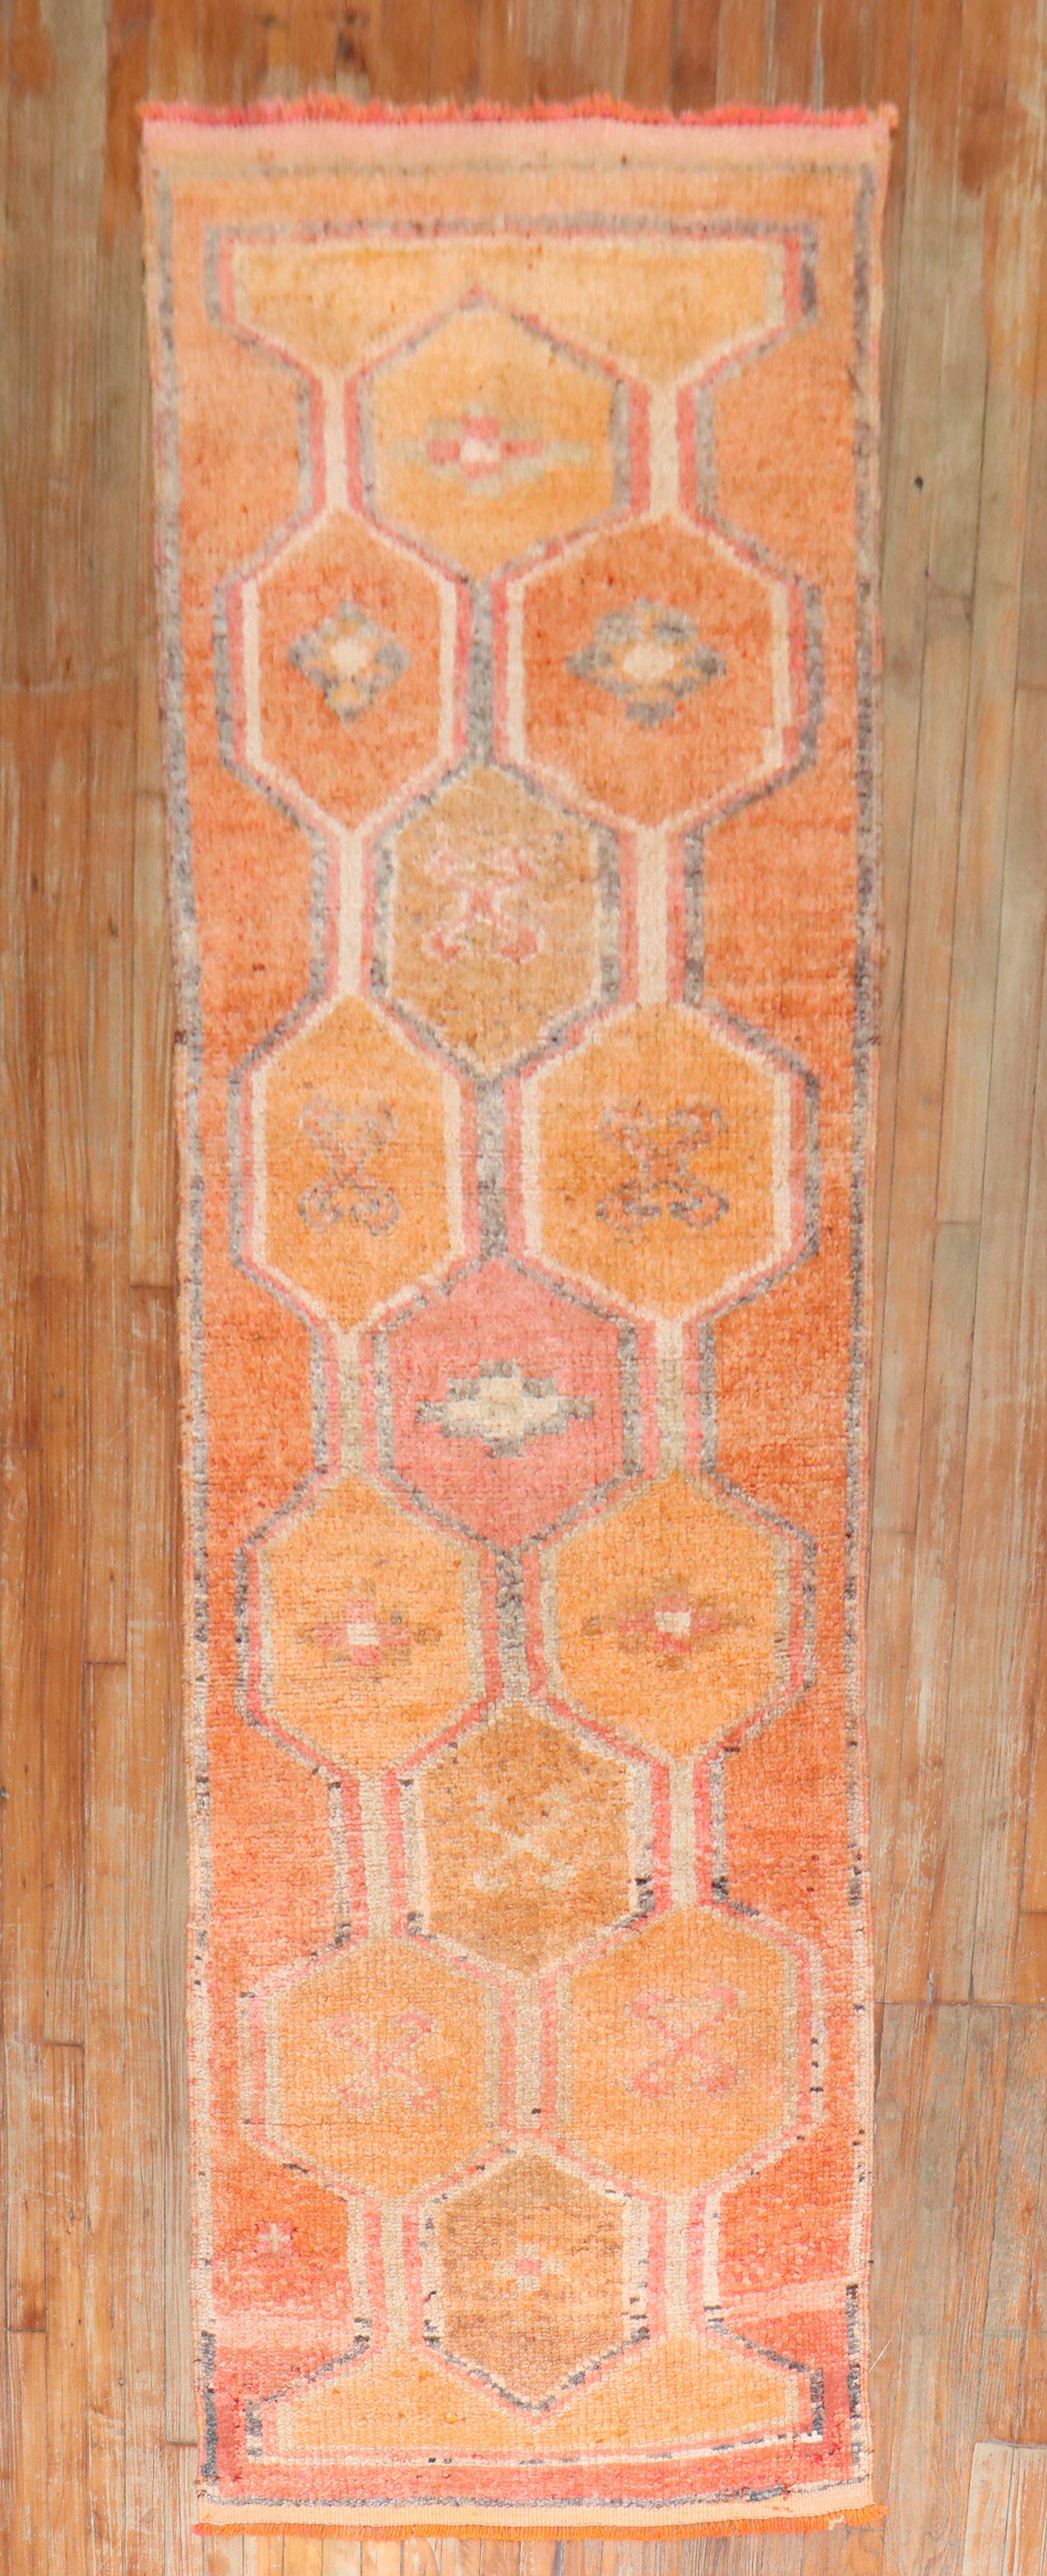 Mid 20th century tribal Turkish Anatolian runner with a tribal design on a bright orange field

Measures: 2'11